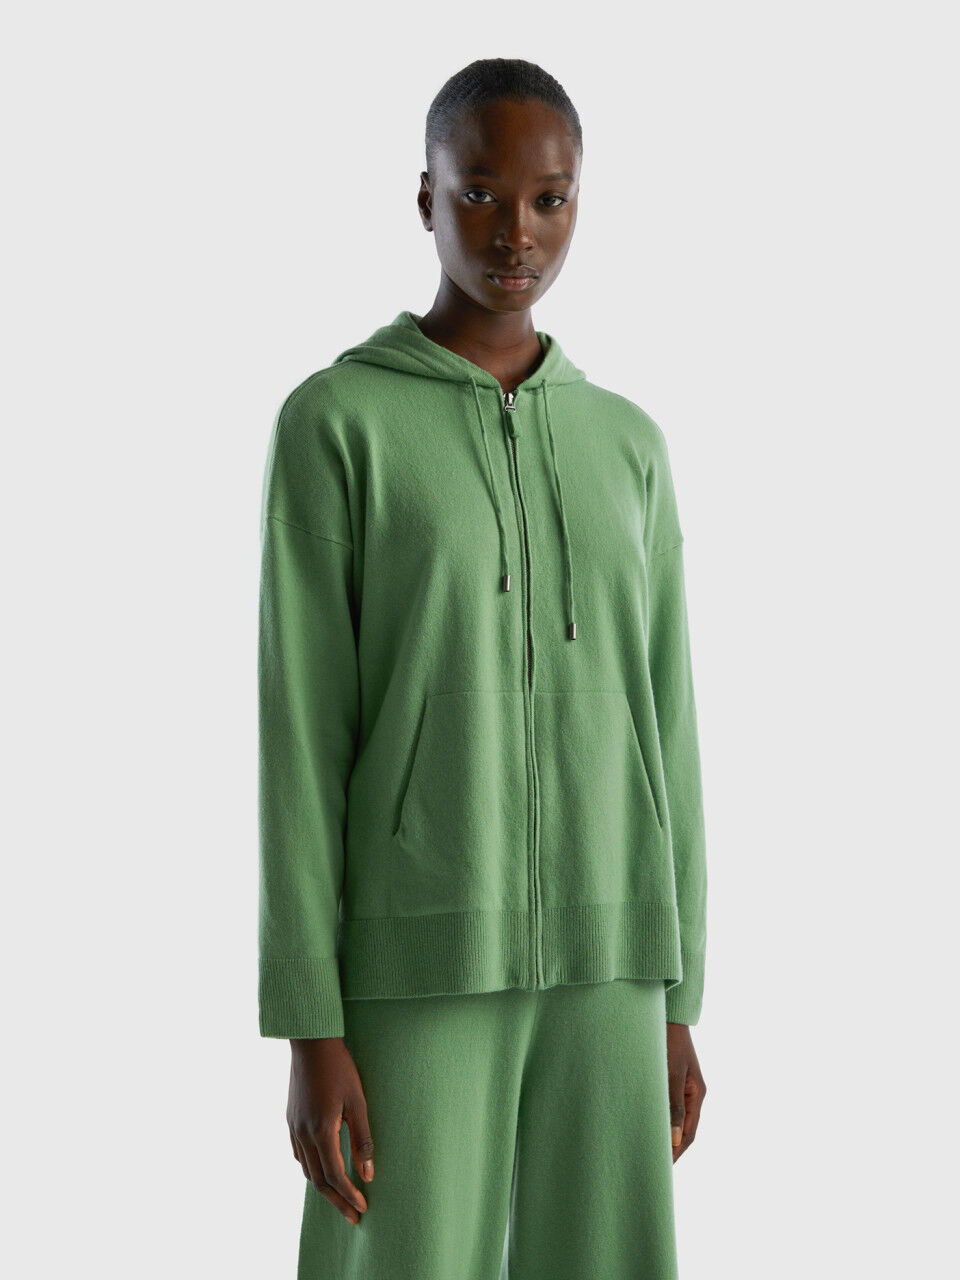 Sage green sweater in cashmere blend with hood